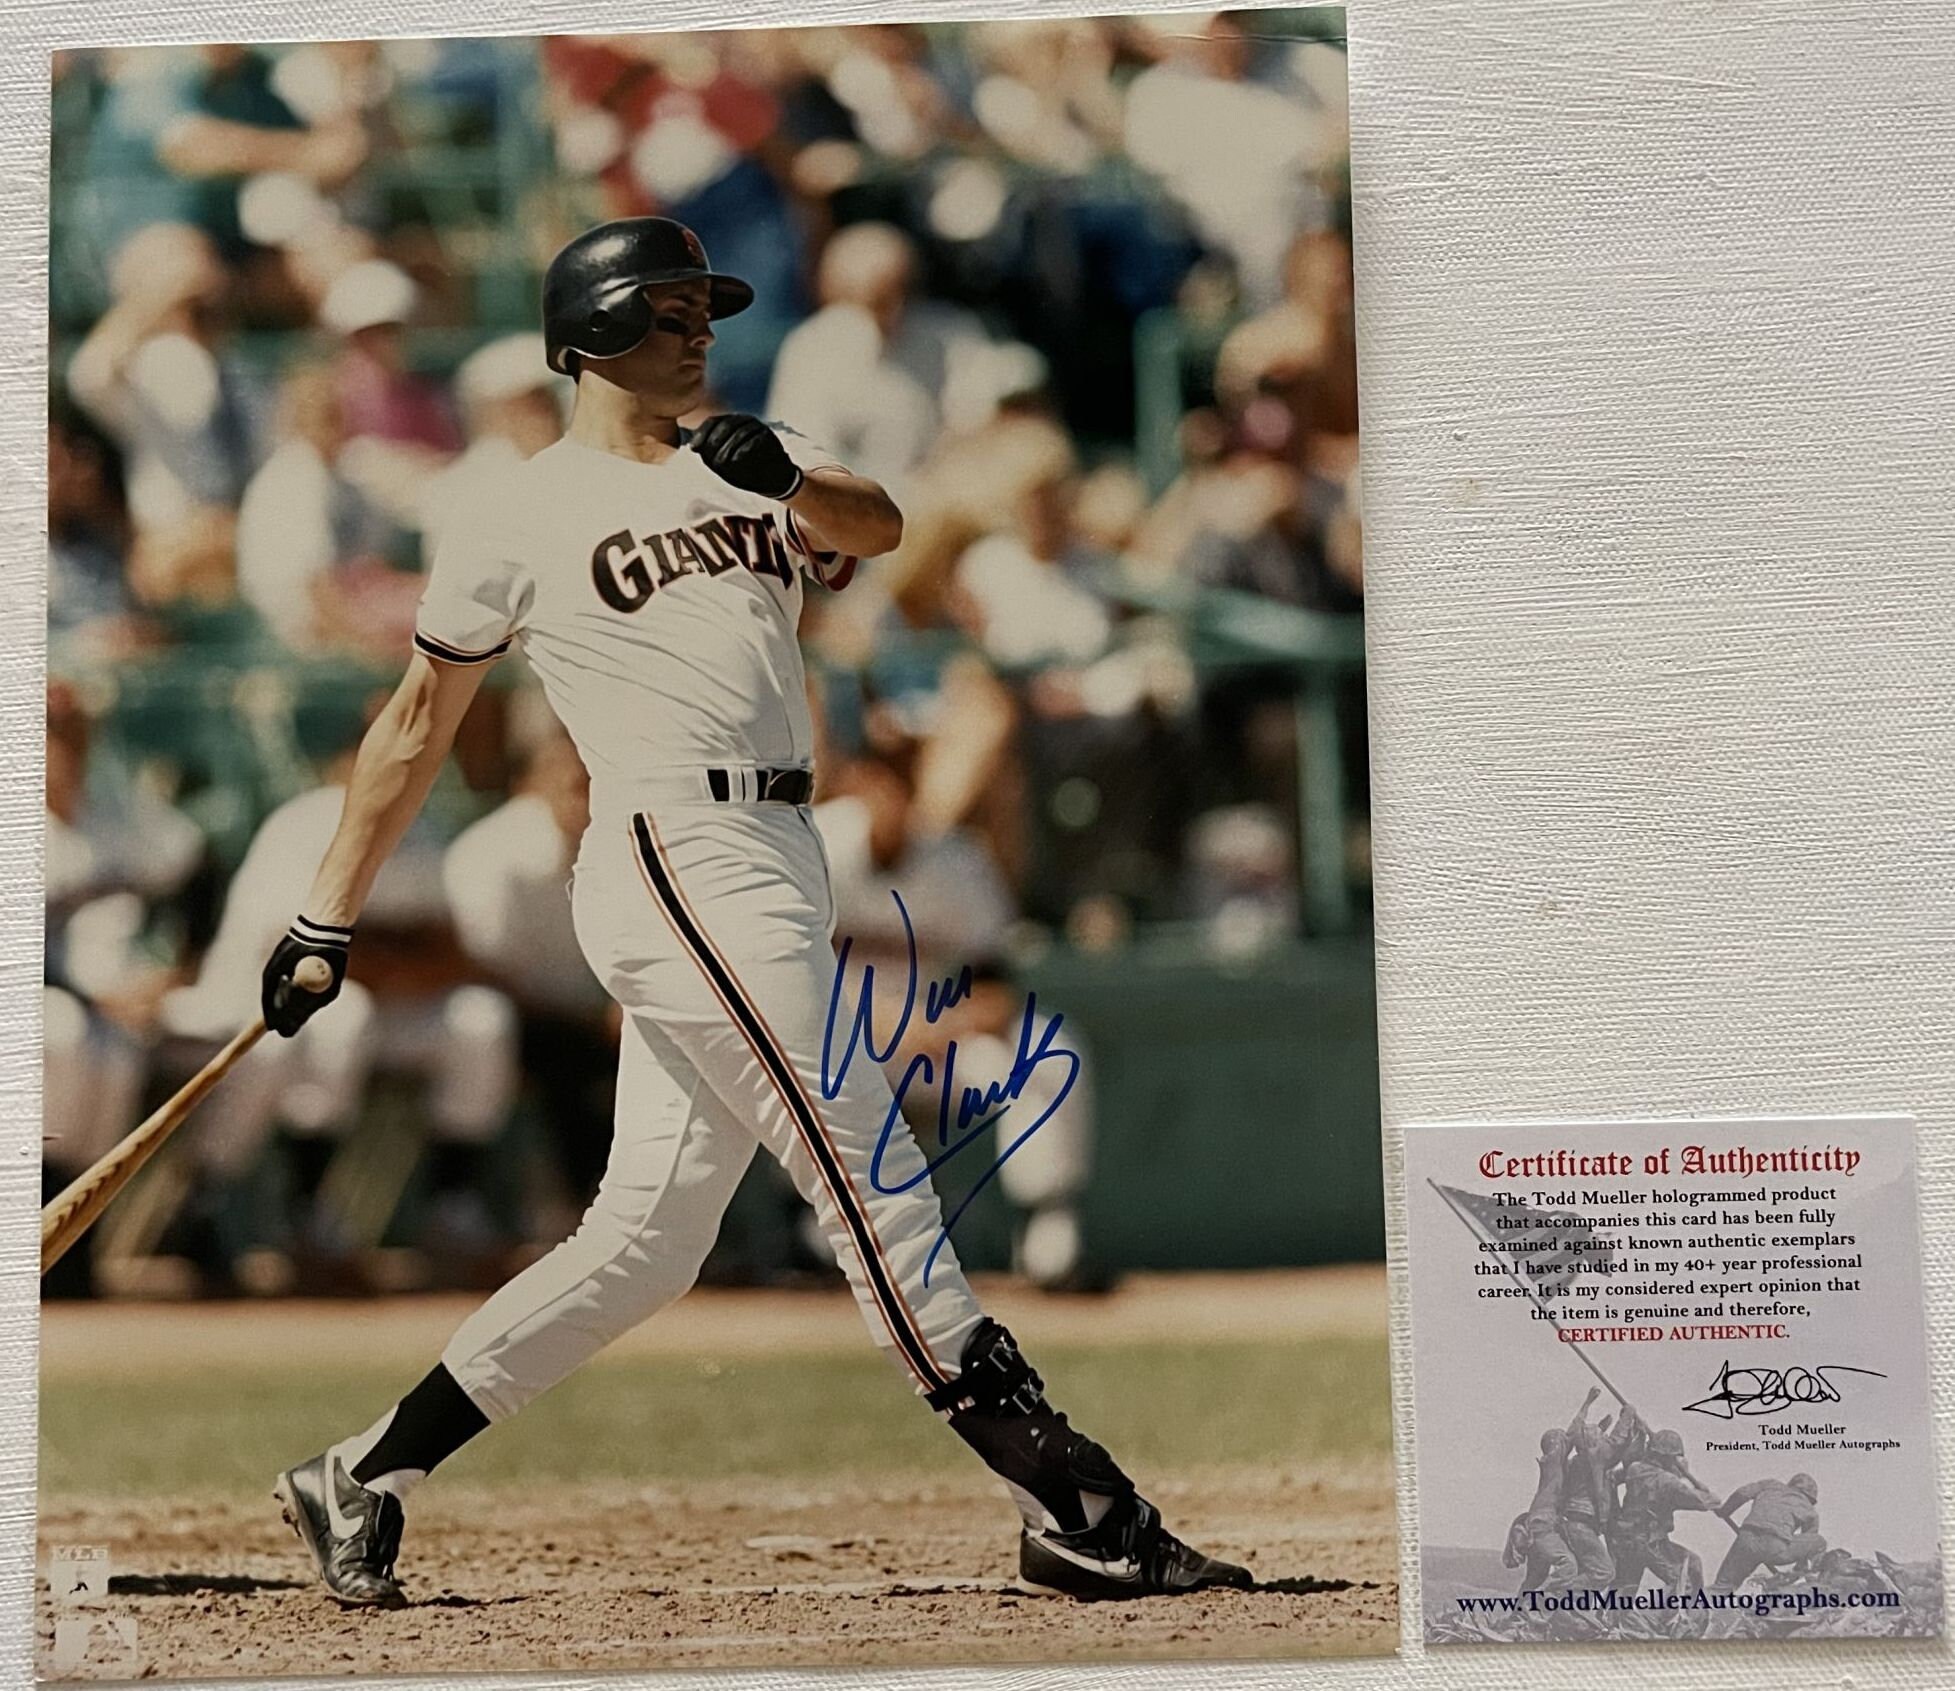  Will Clark Signed Autographed San Francisco Giants